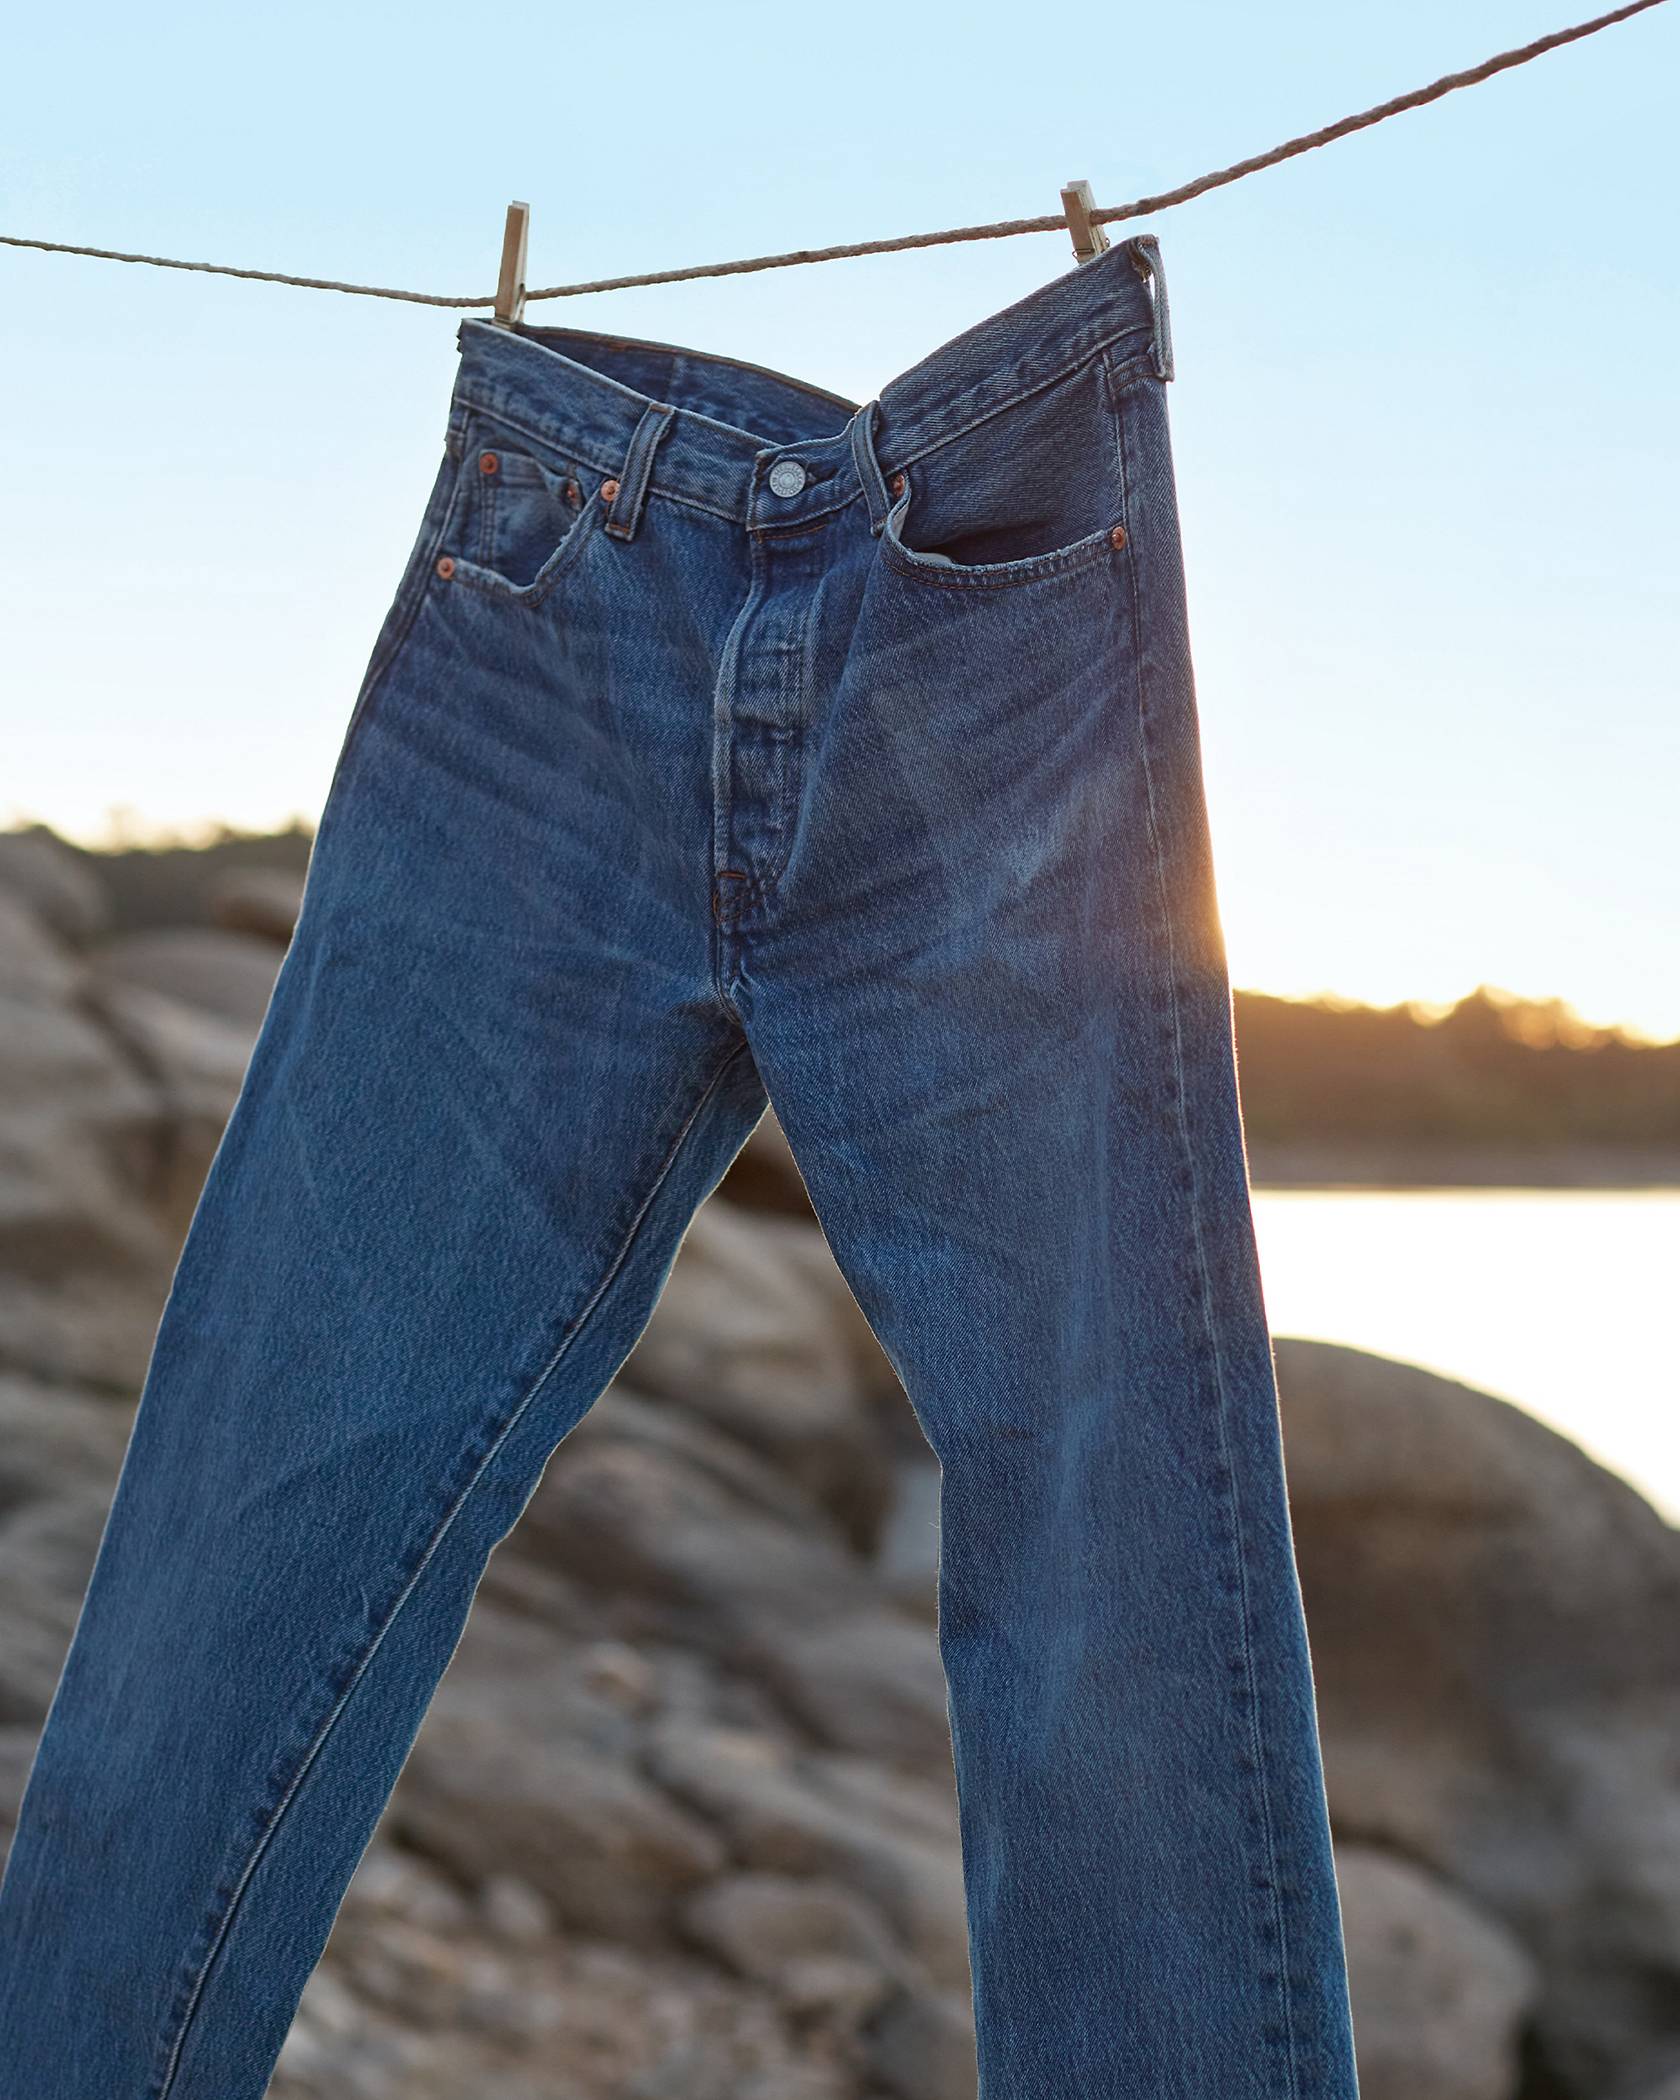 Stained Jeans Before Laundry Stock Photo - Download Image Now